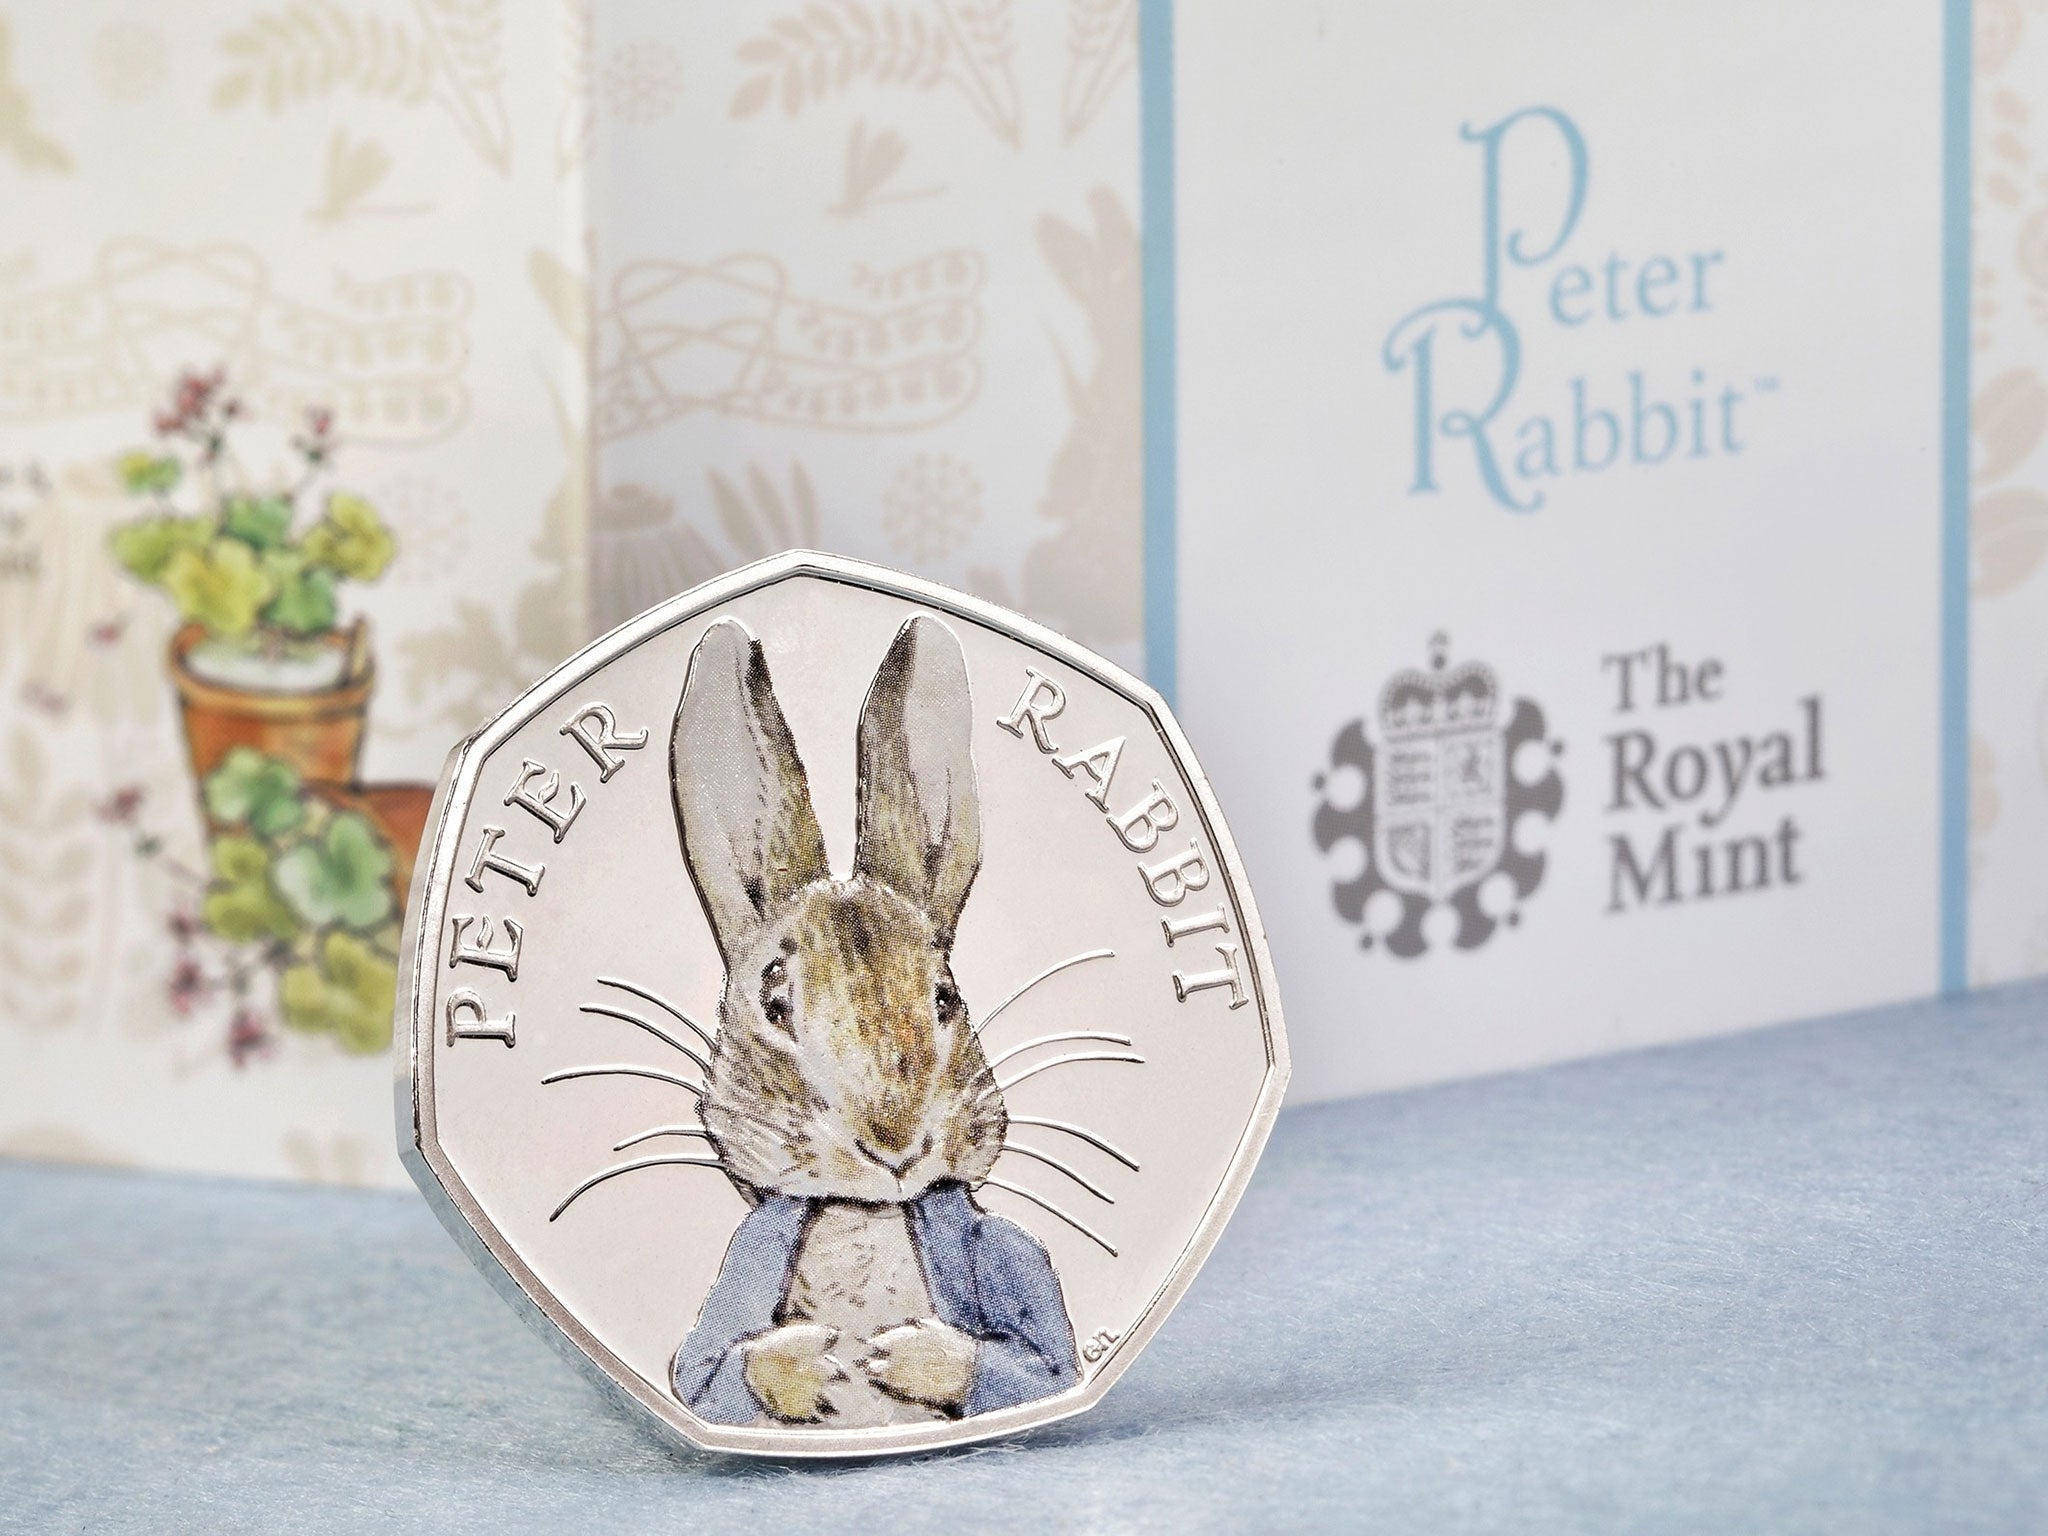 Royal Mint photo of their special edition coloured Peter Rabbit coin, an addition to its Beatrix Potter range part of the celebrations that mark 150 years since the author's birth